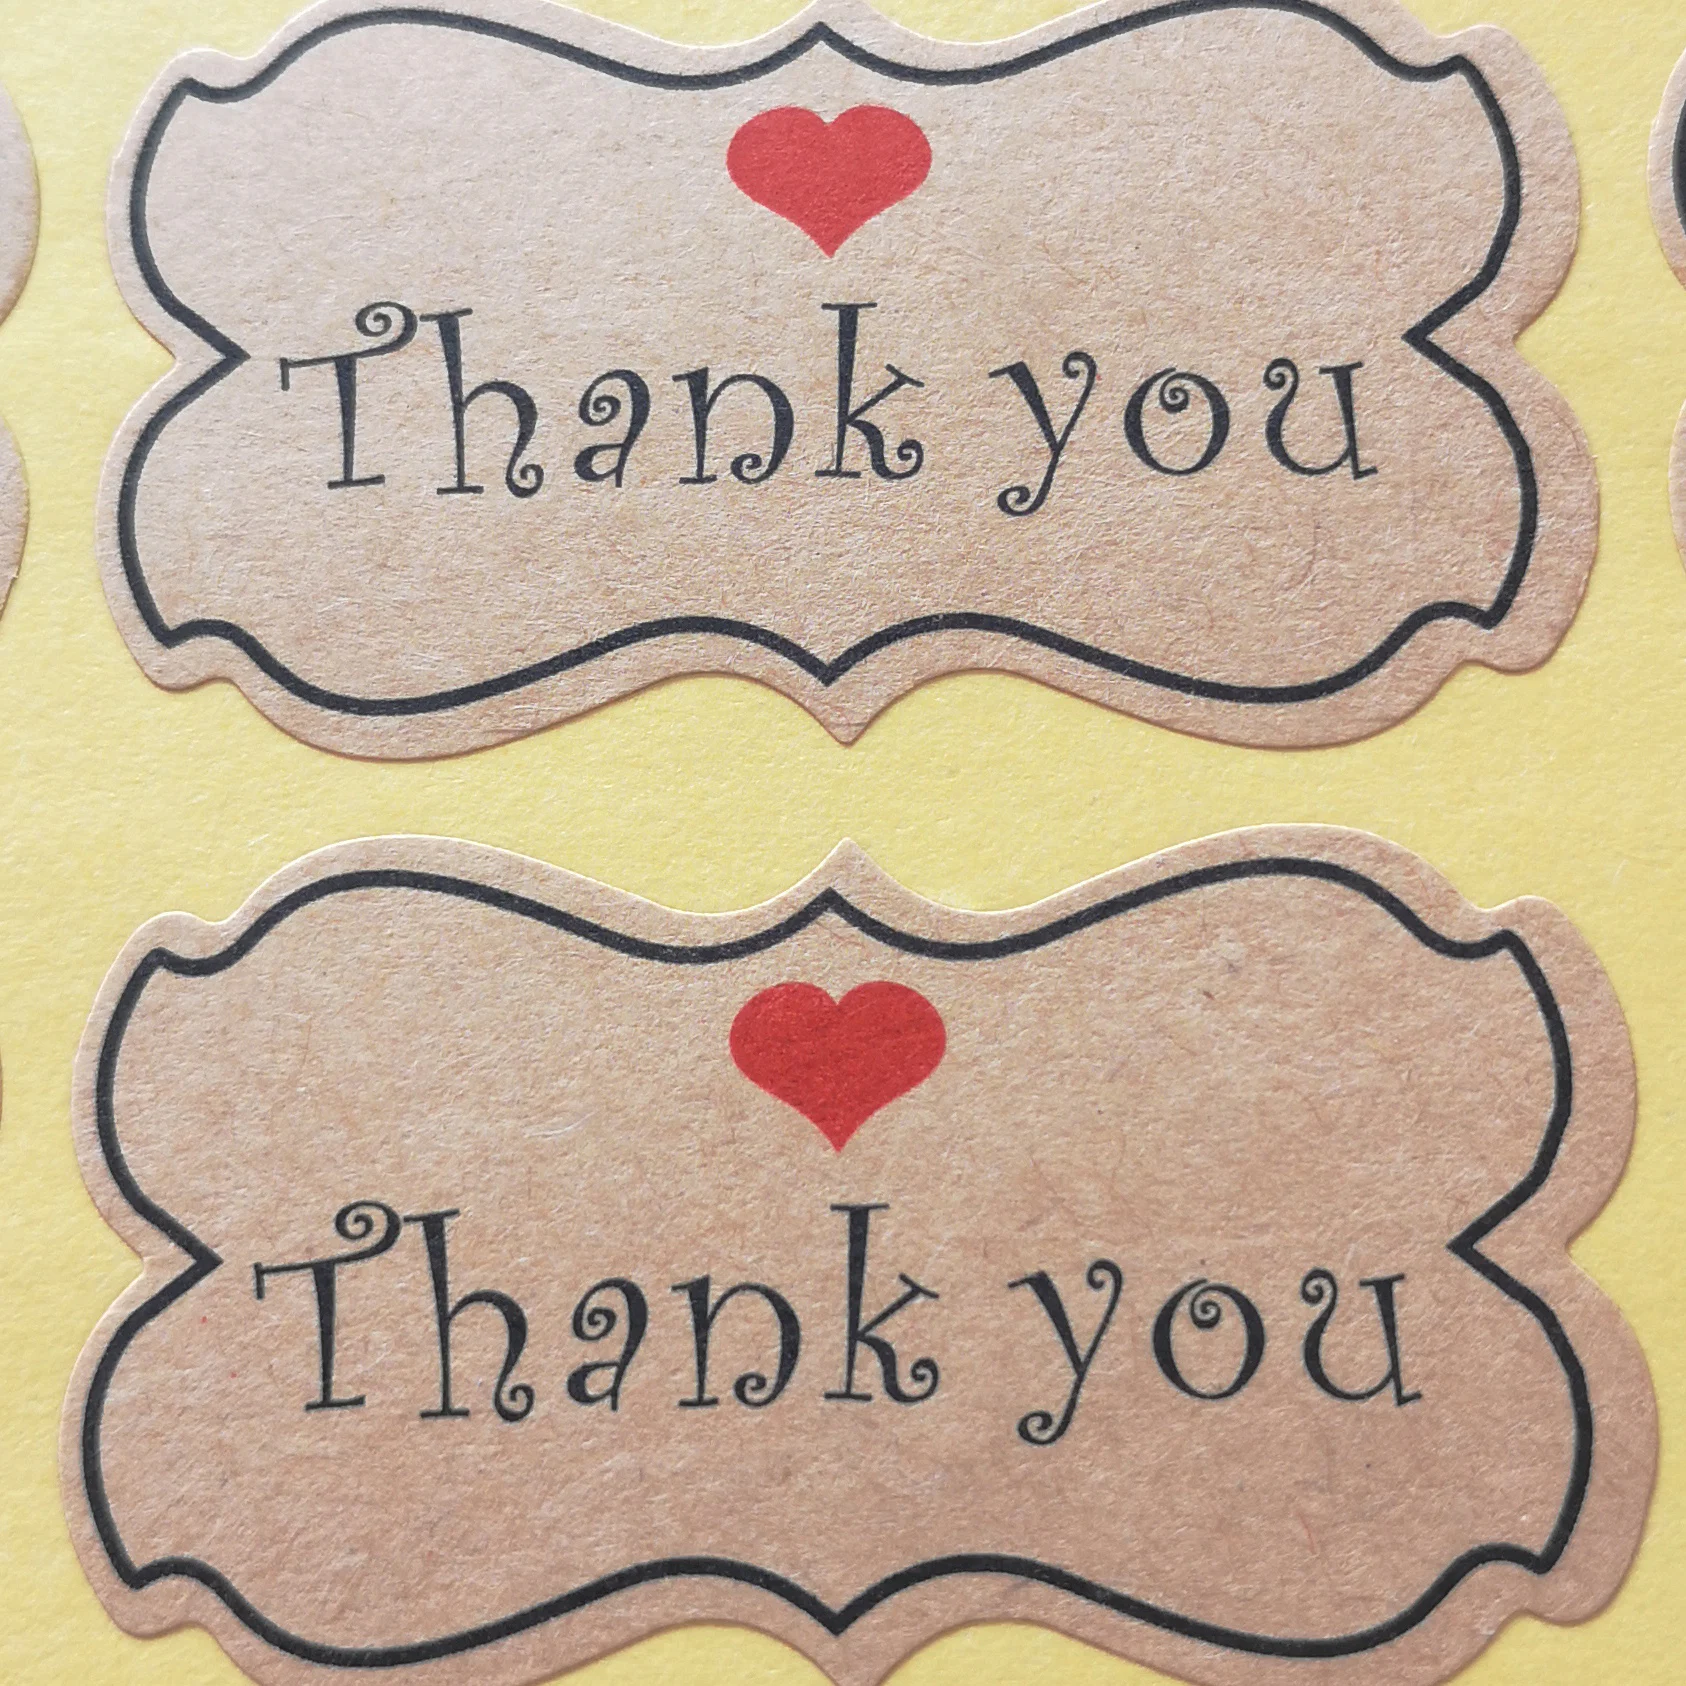 3600 stickers/lot 32x58mm THANK YOU Self-adhesive kraft paper sealing label sticker for packing, Item No.TK33